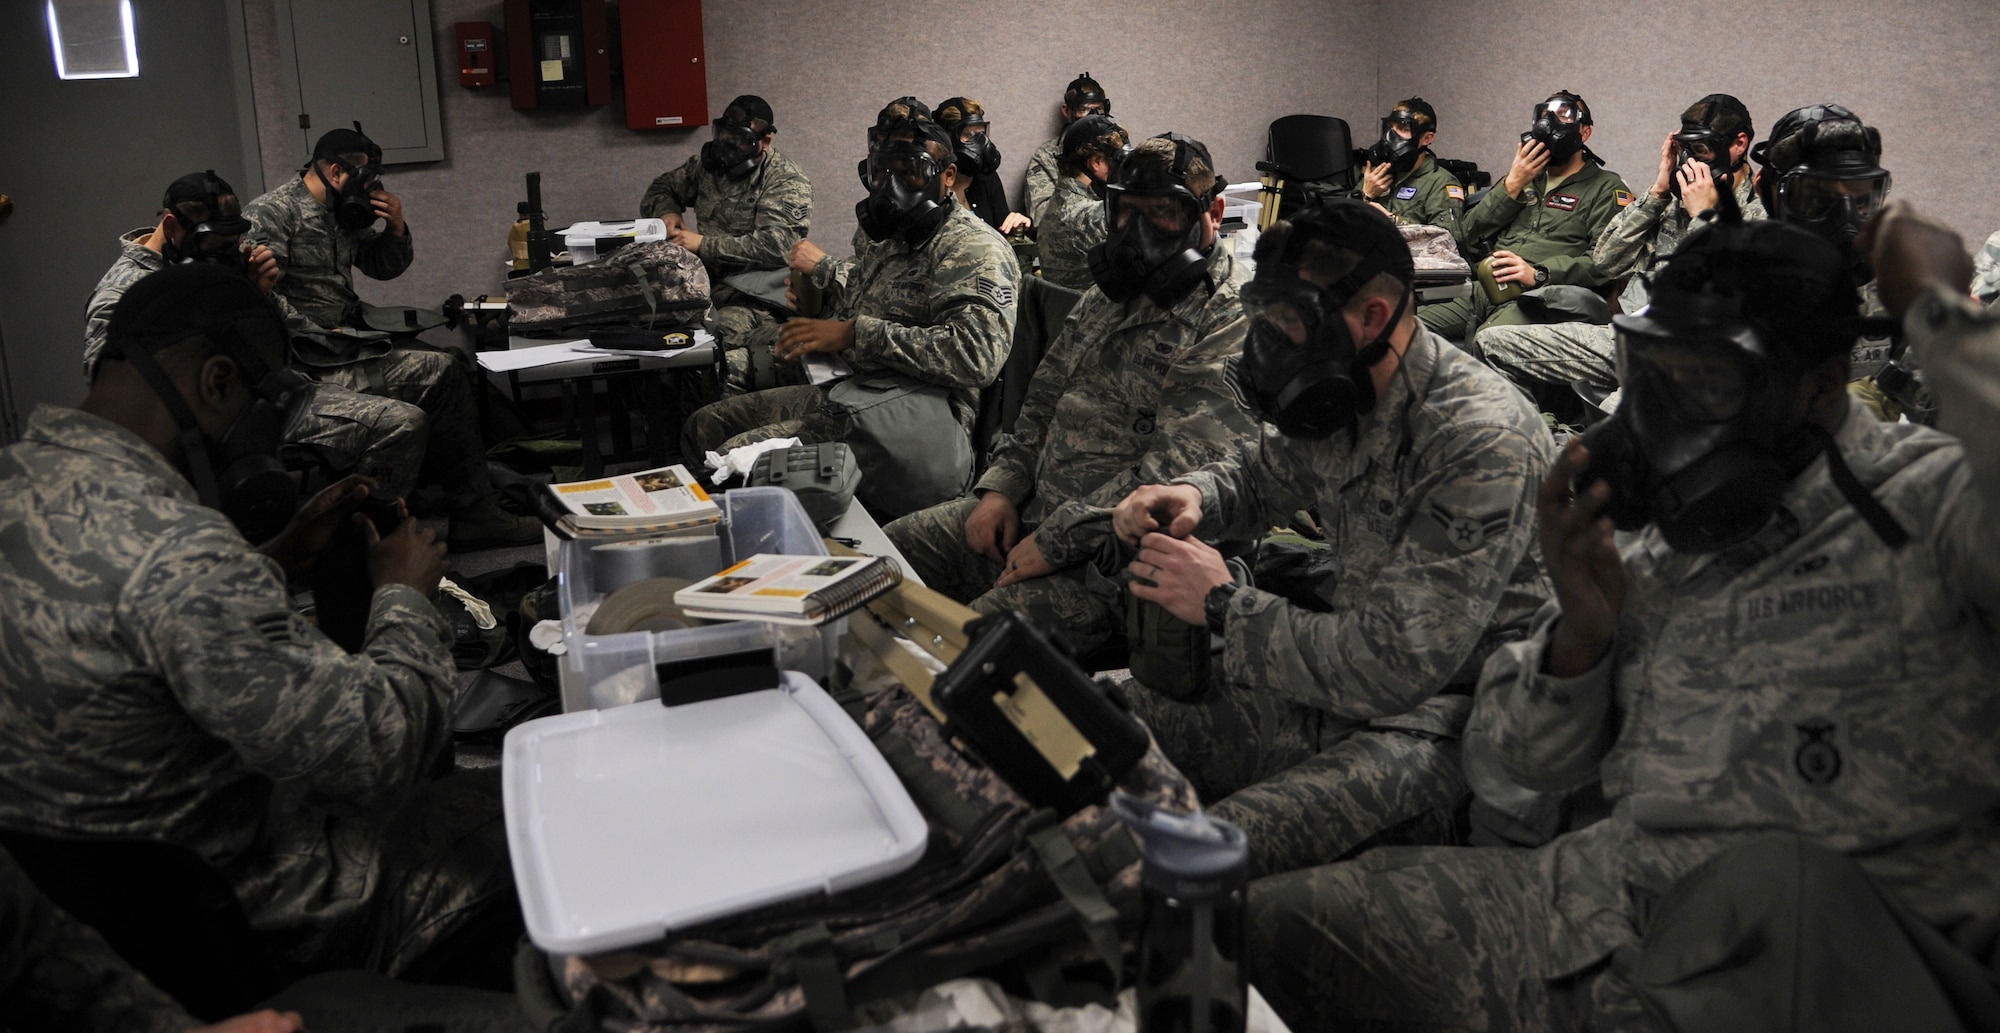 A group of Airmen try on the M50 gas mask as part of a chemical, biological, radiological and nuclear defense class Feb. 12, 2014, at Little Rock Air Force Base, Ark. The gas mask is an essential piece of the mission oriented protective posture gear, which is a vital part of CBRN defense. (U.S. Air Force photo by Airman 1st Class Harry Brexel)